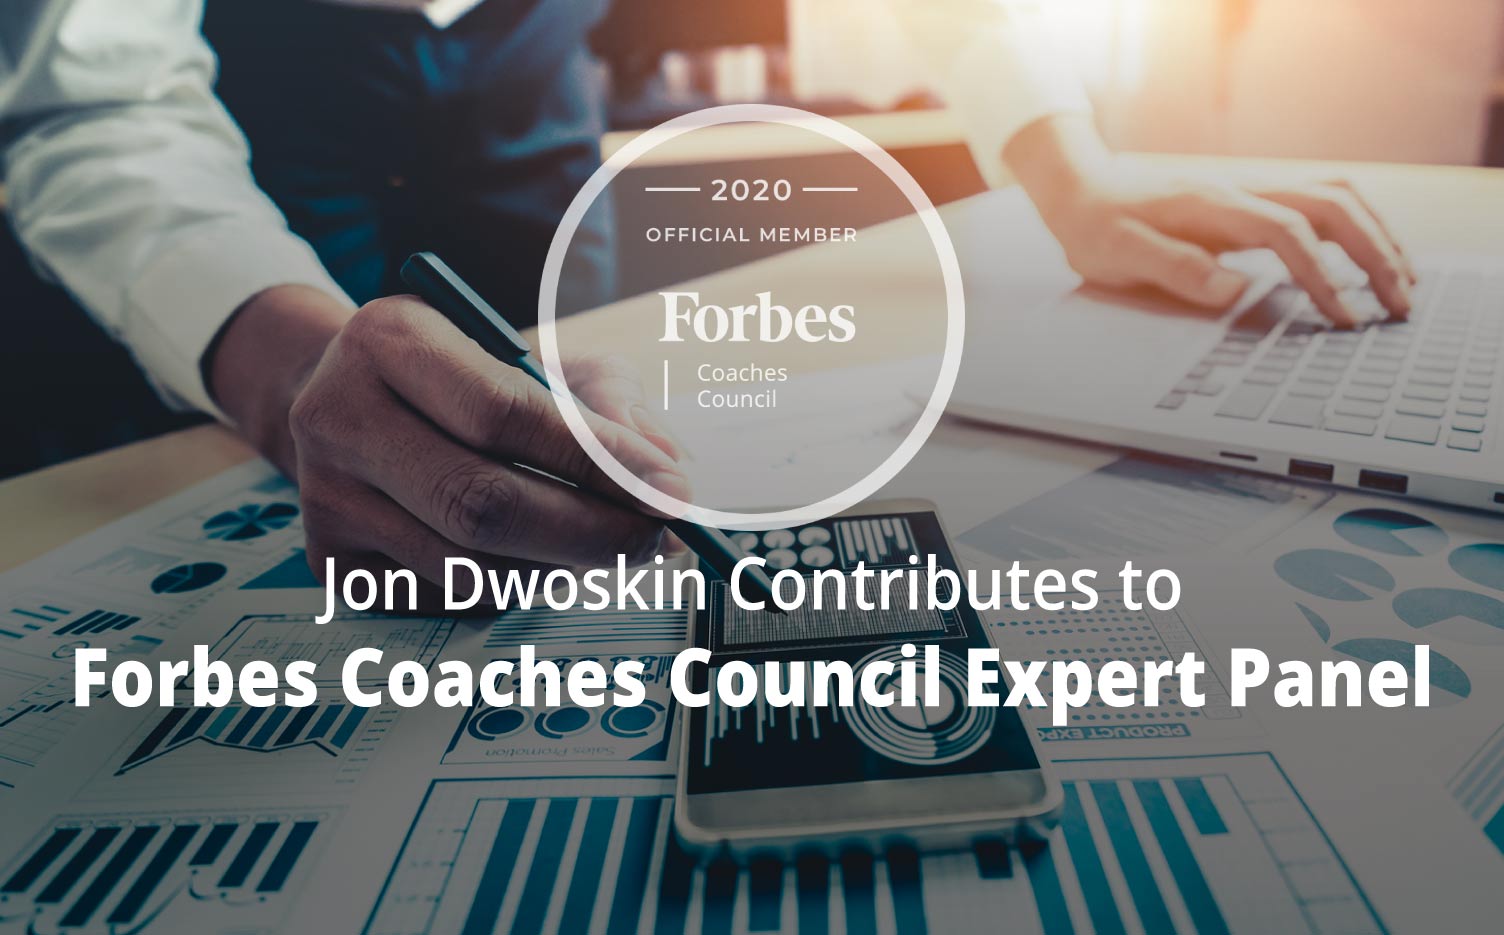 Jon Contributes to Forbes Coaches Council Expert Panel: 15 Tips For Small Business Owners Planning Their First Budget